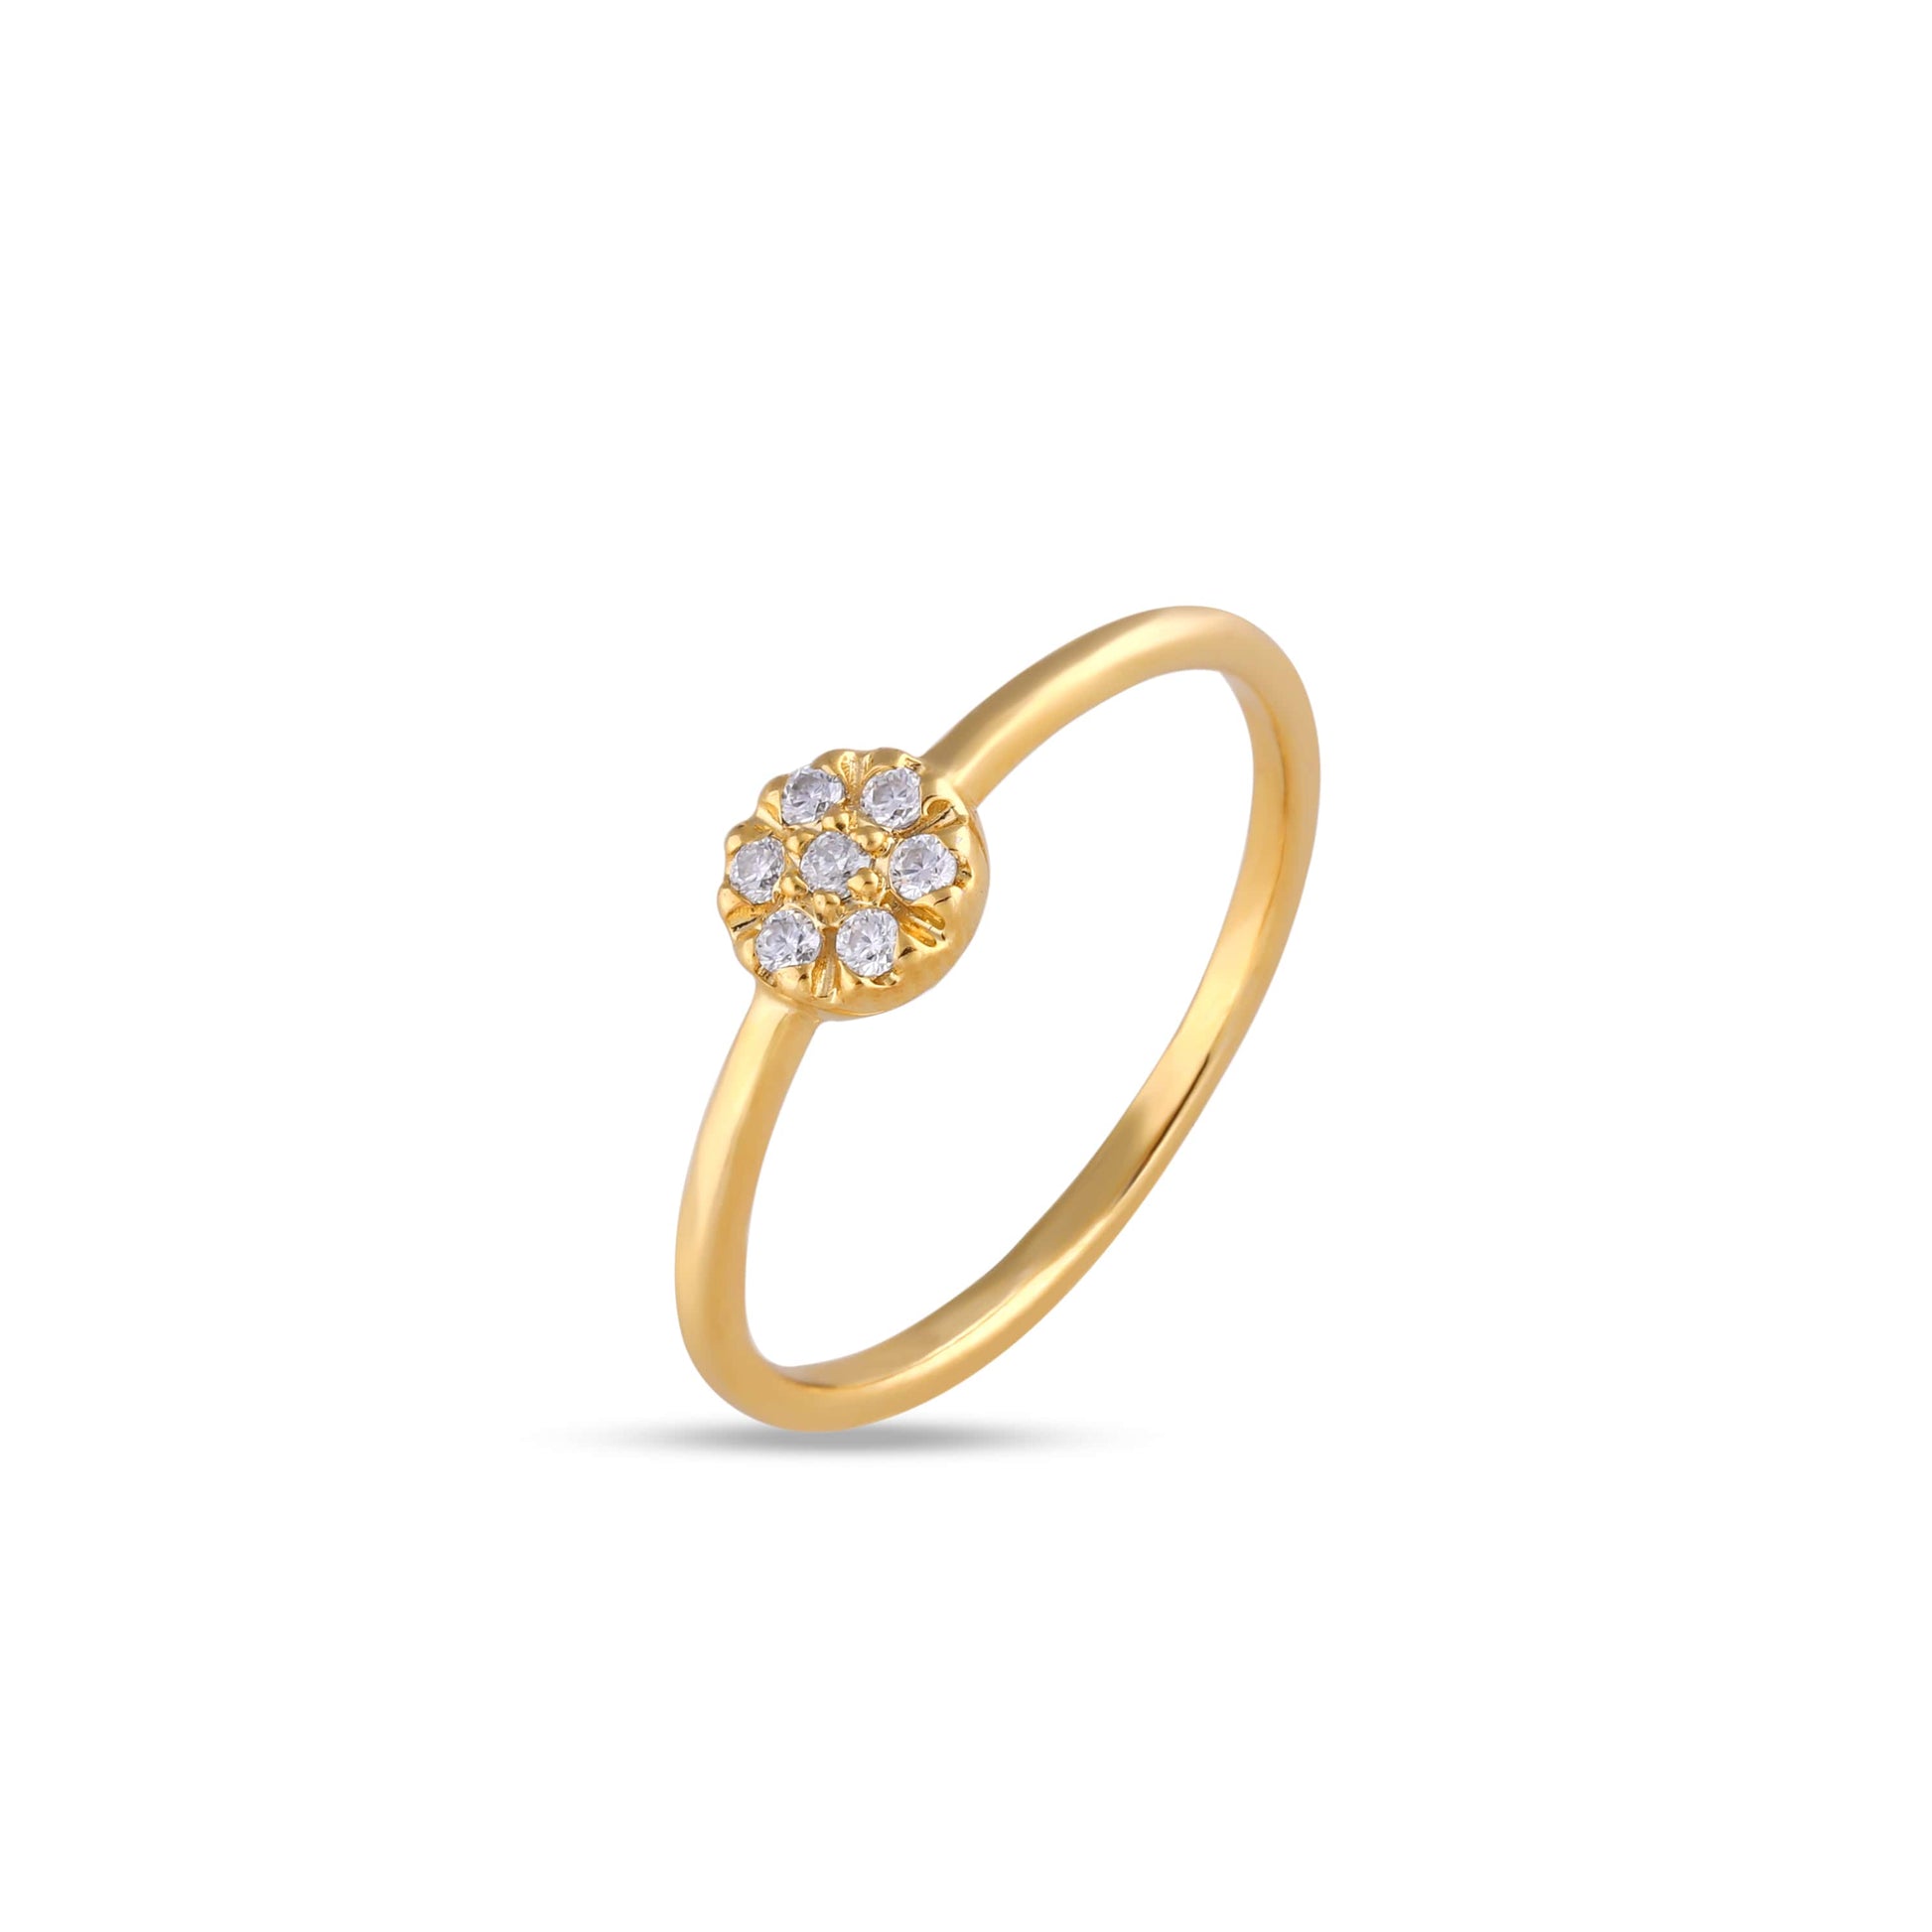 Moissanite cluster ring in yellow gold